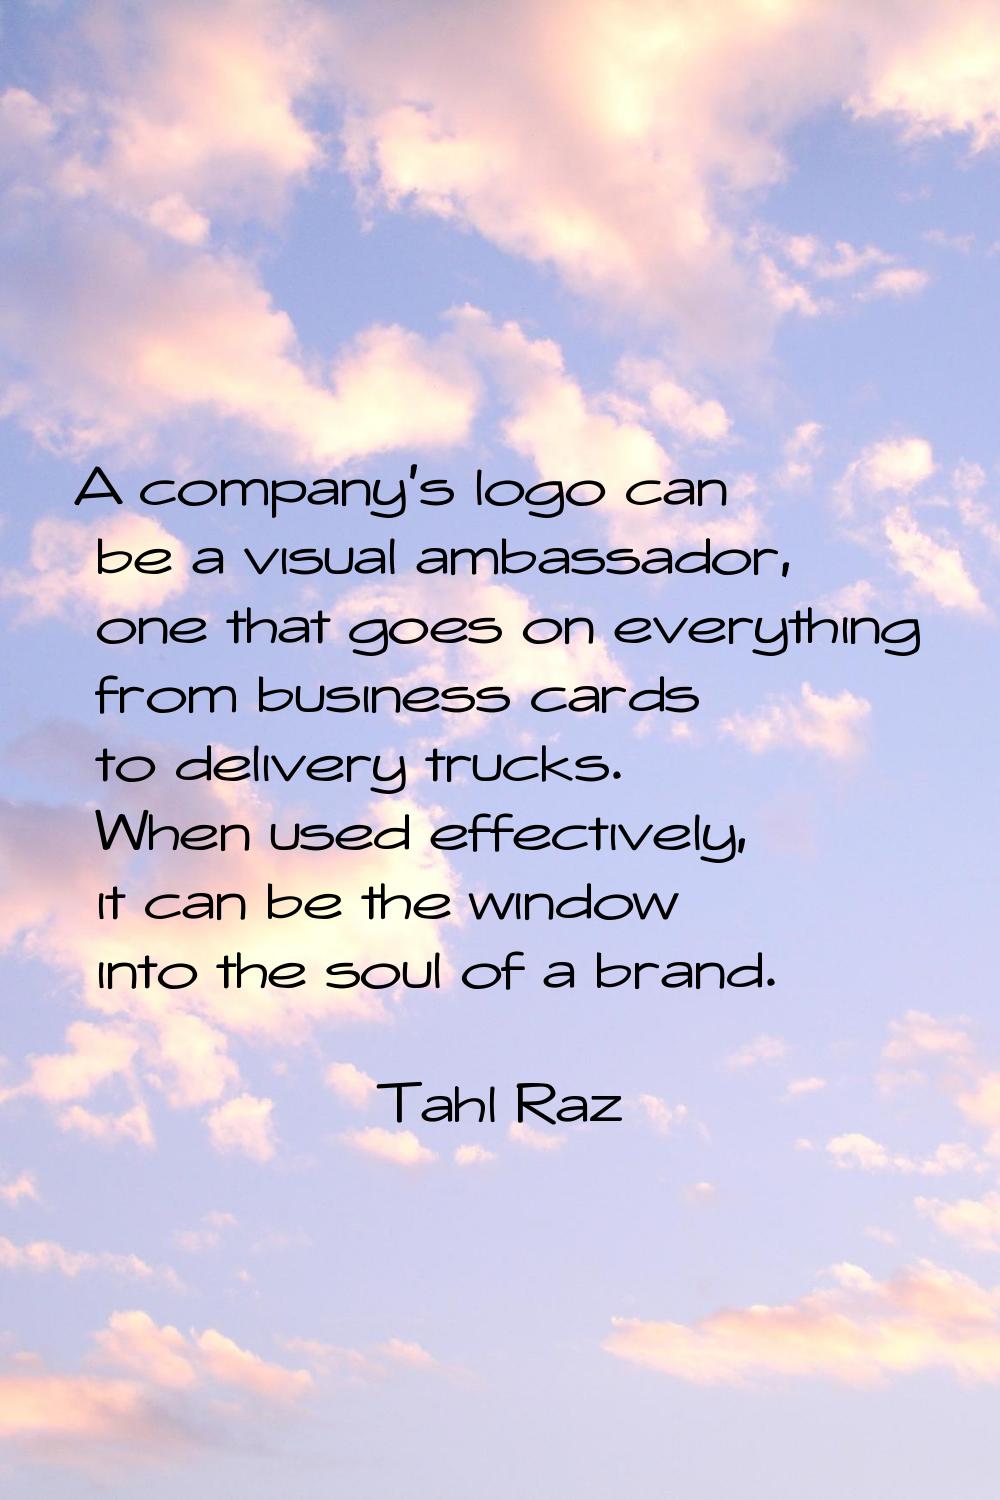 A company's logo can be a visual ambassador, one that goes on everything from business cards to del